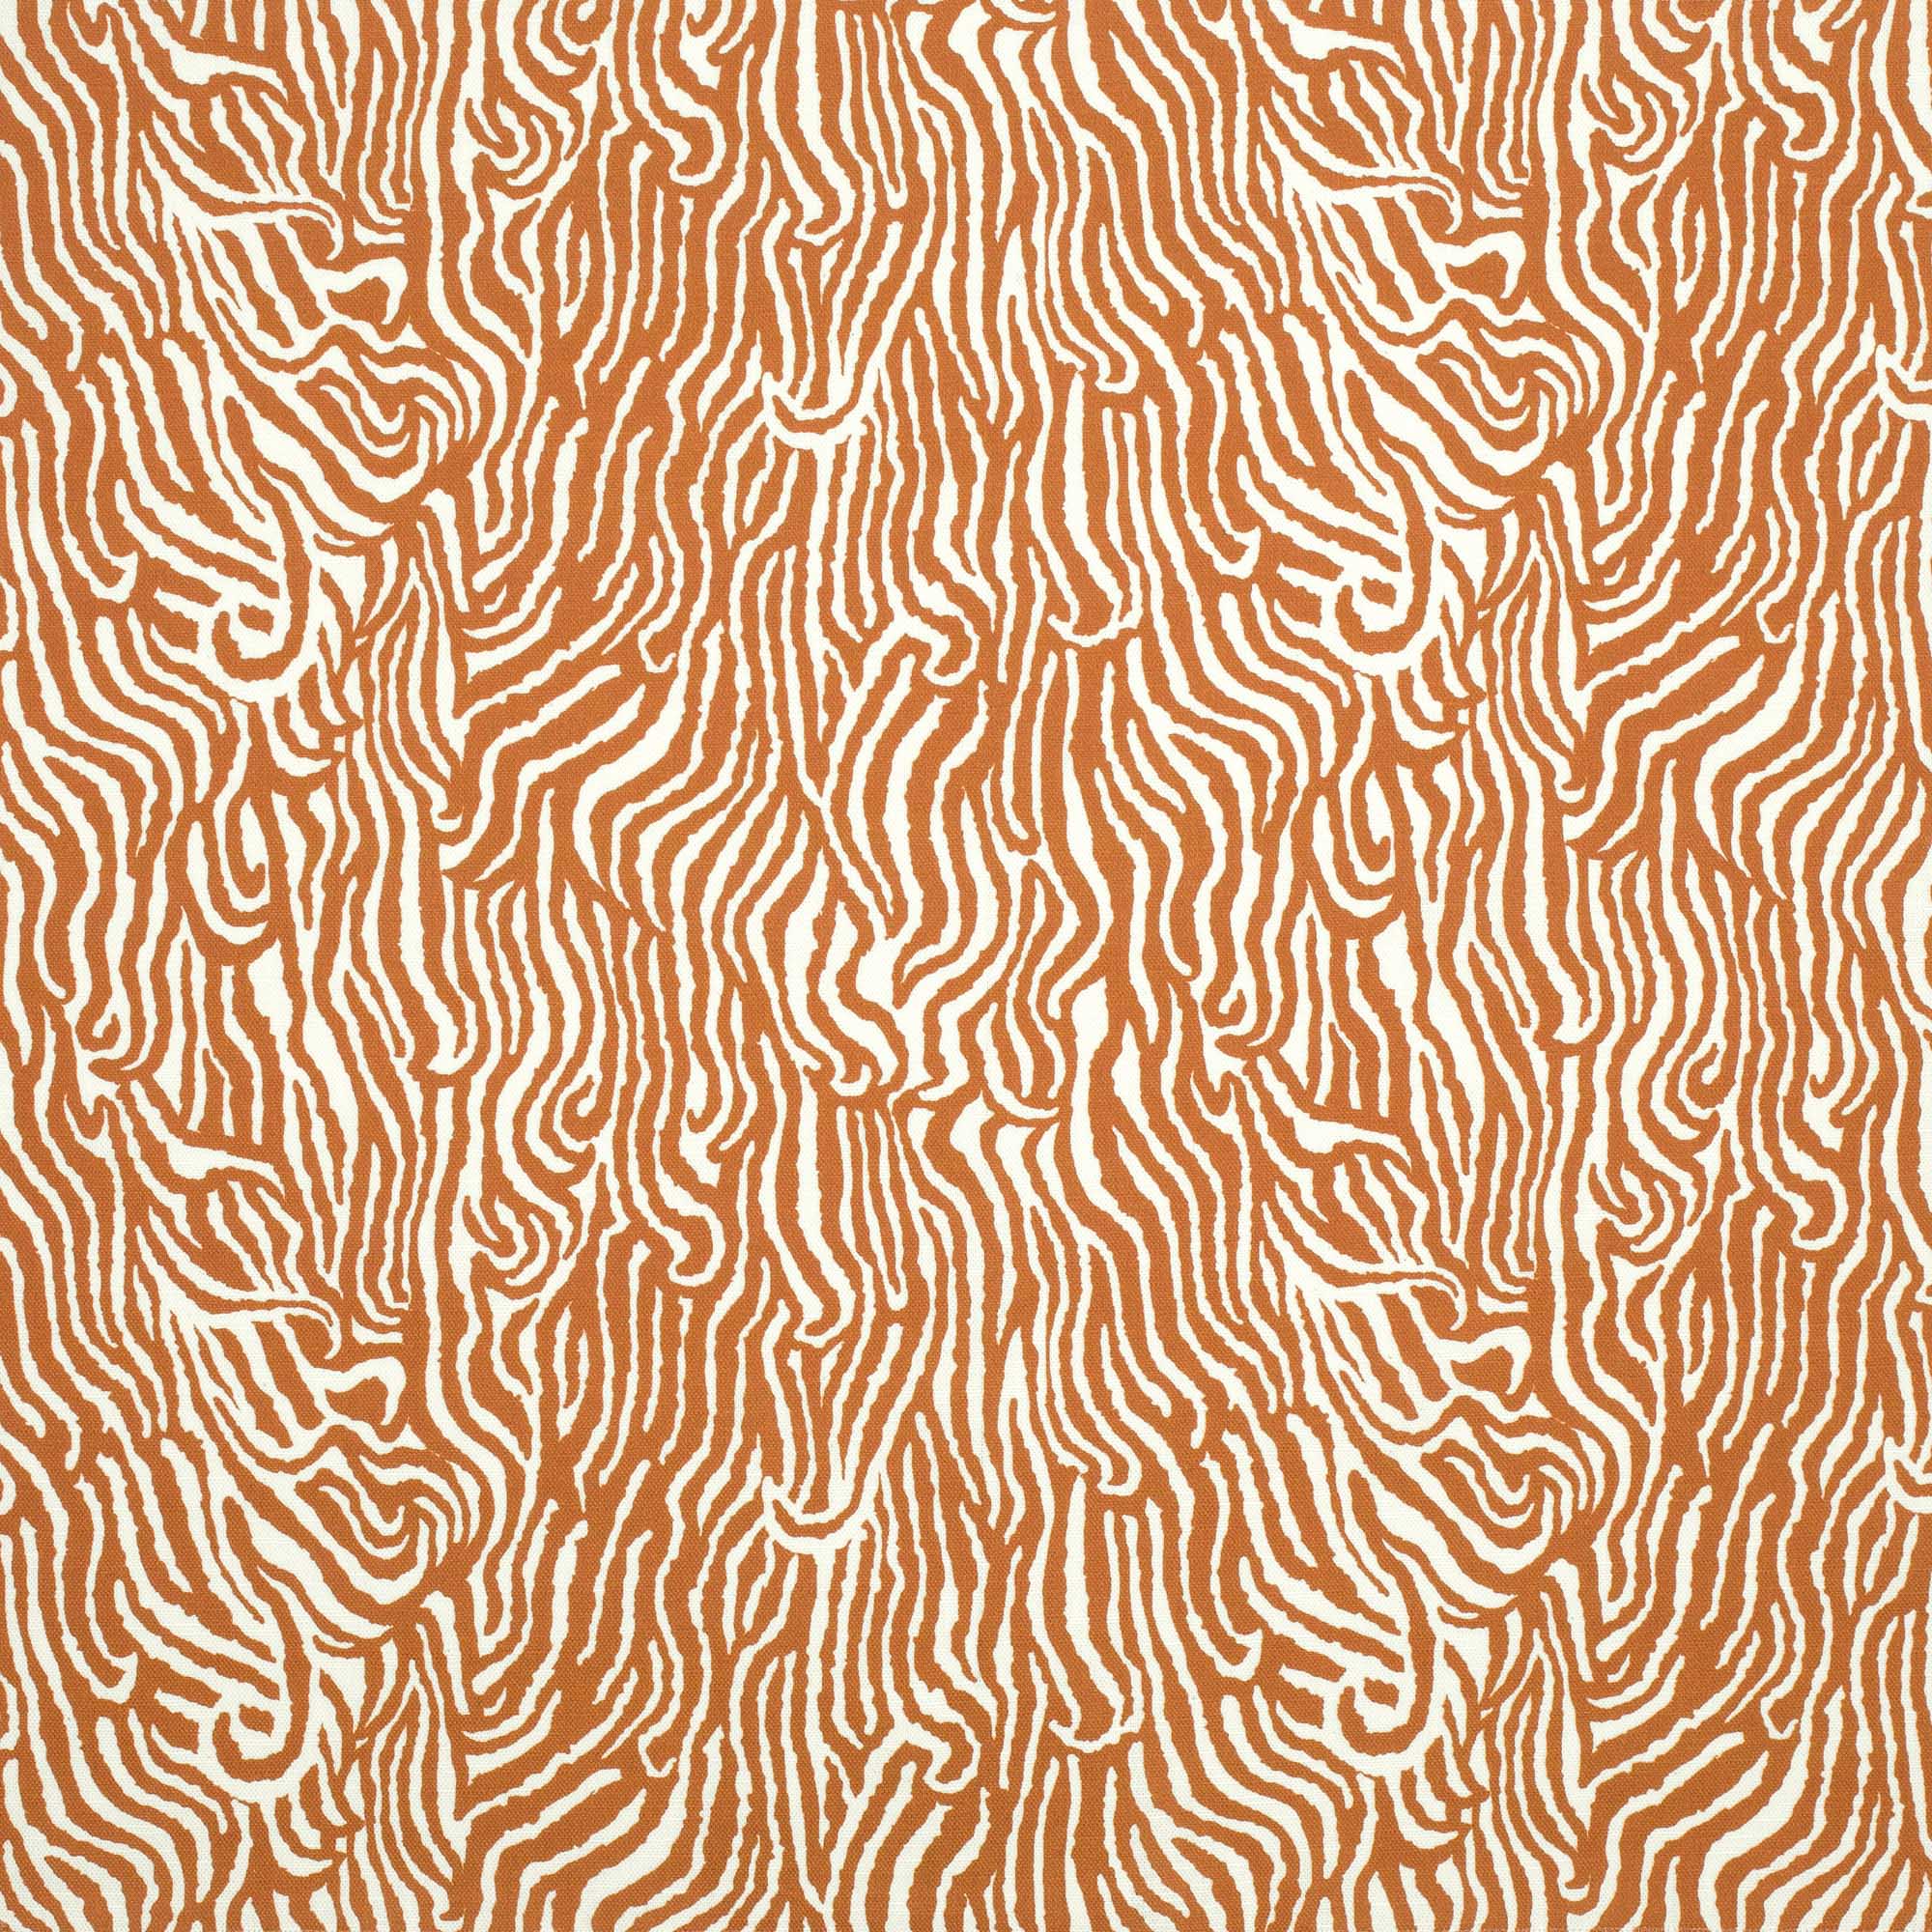 Detail of fabric in a playful animal print in burnt orange on a white field.